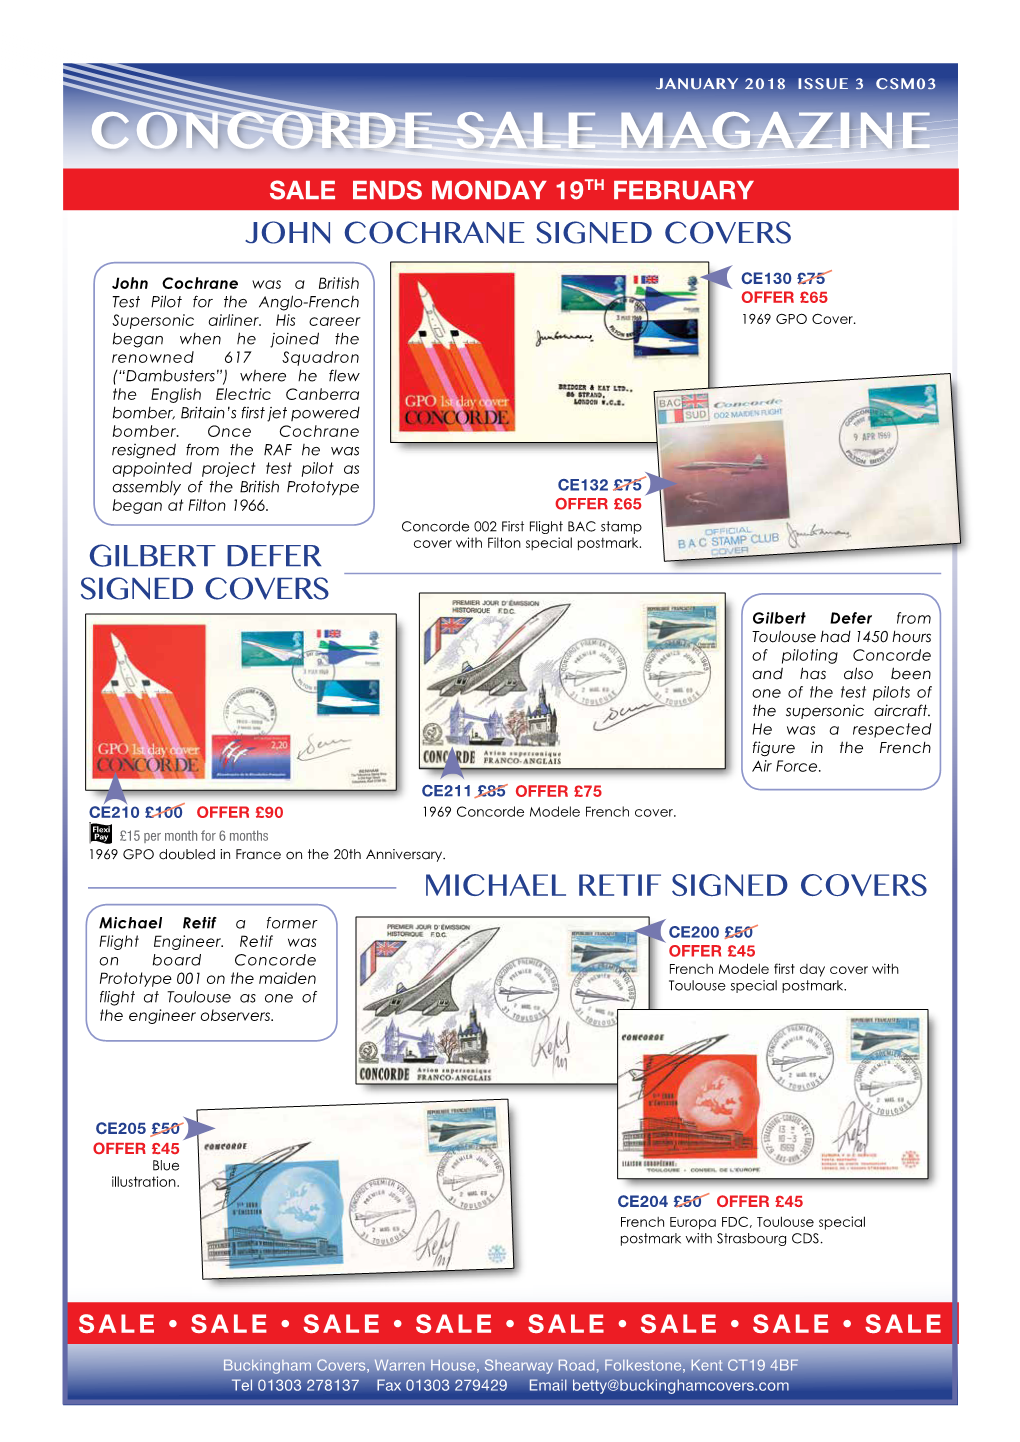 Concorde Sale Magazine Sale Ends Monday 19Th February John Cochrane Signed Covers